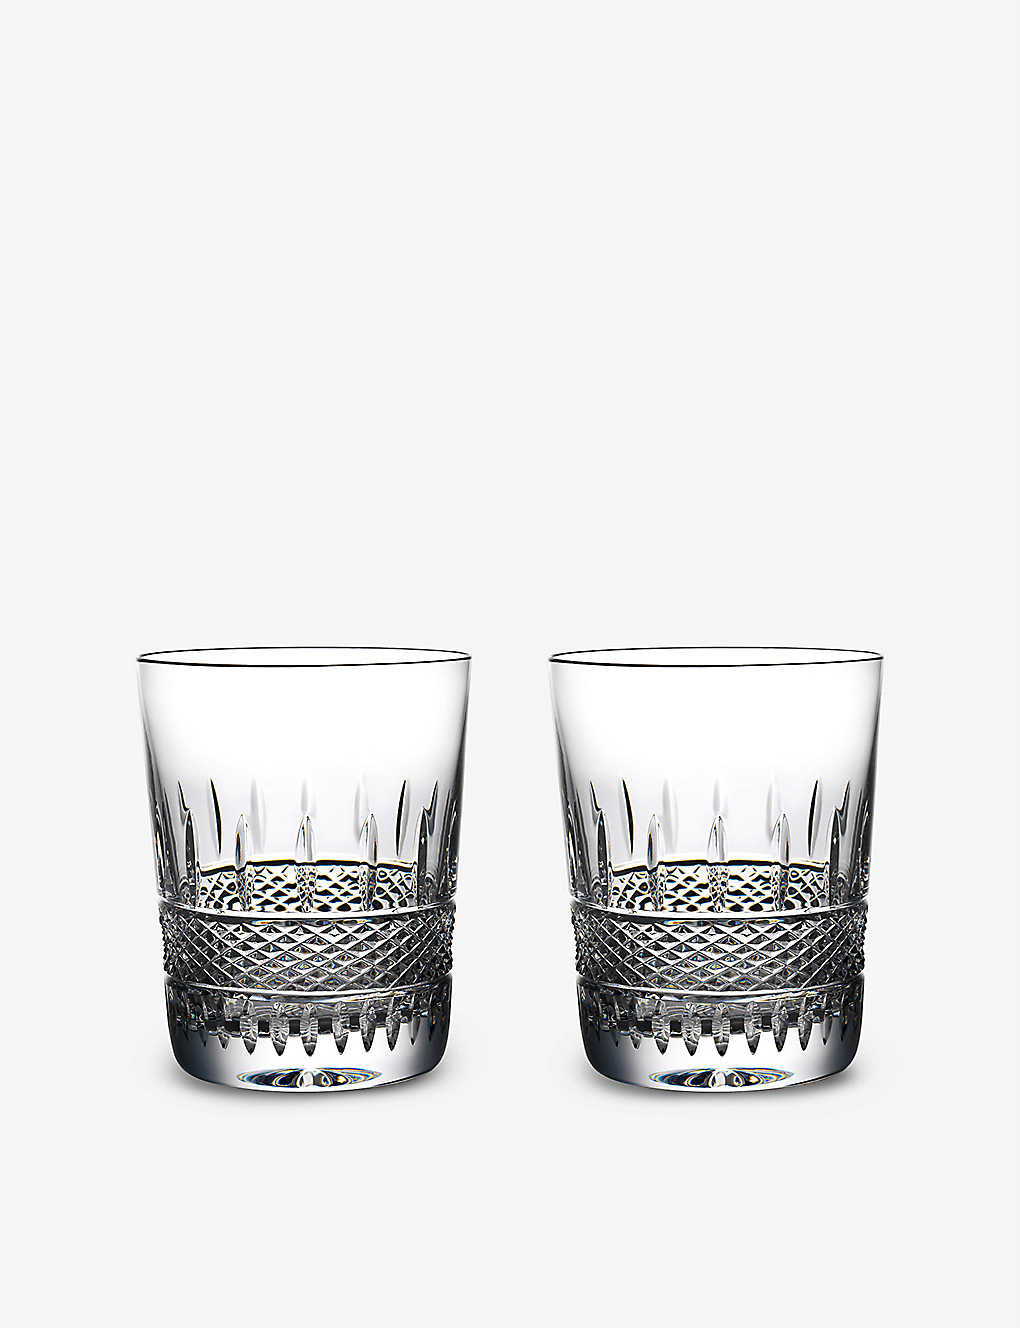 Waterford Irish Lace Crystal Glasses Set Of Two